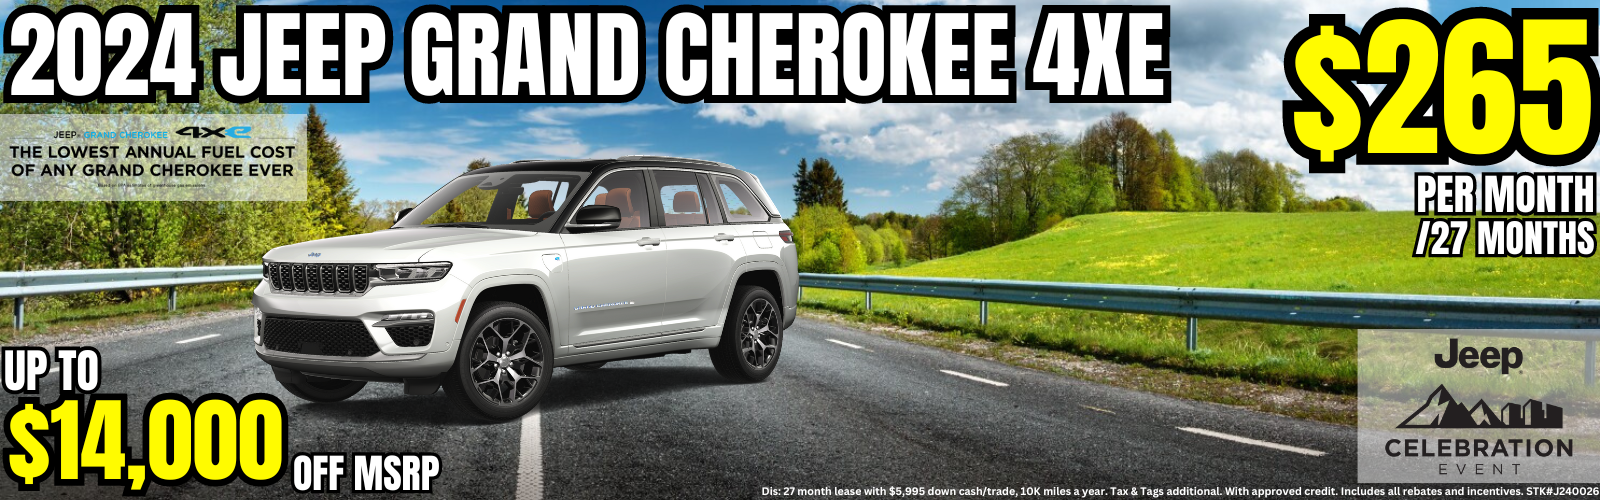 Jeep Grand Cherokee 4xe - Lease Special